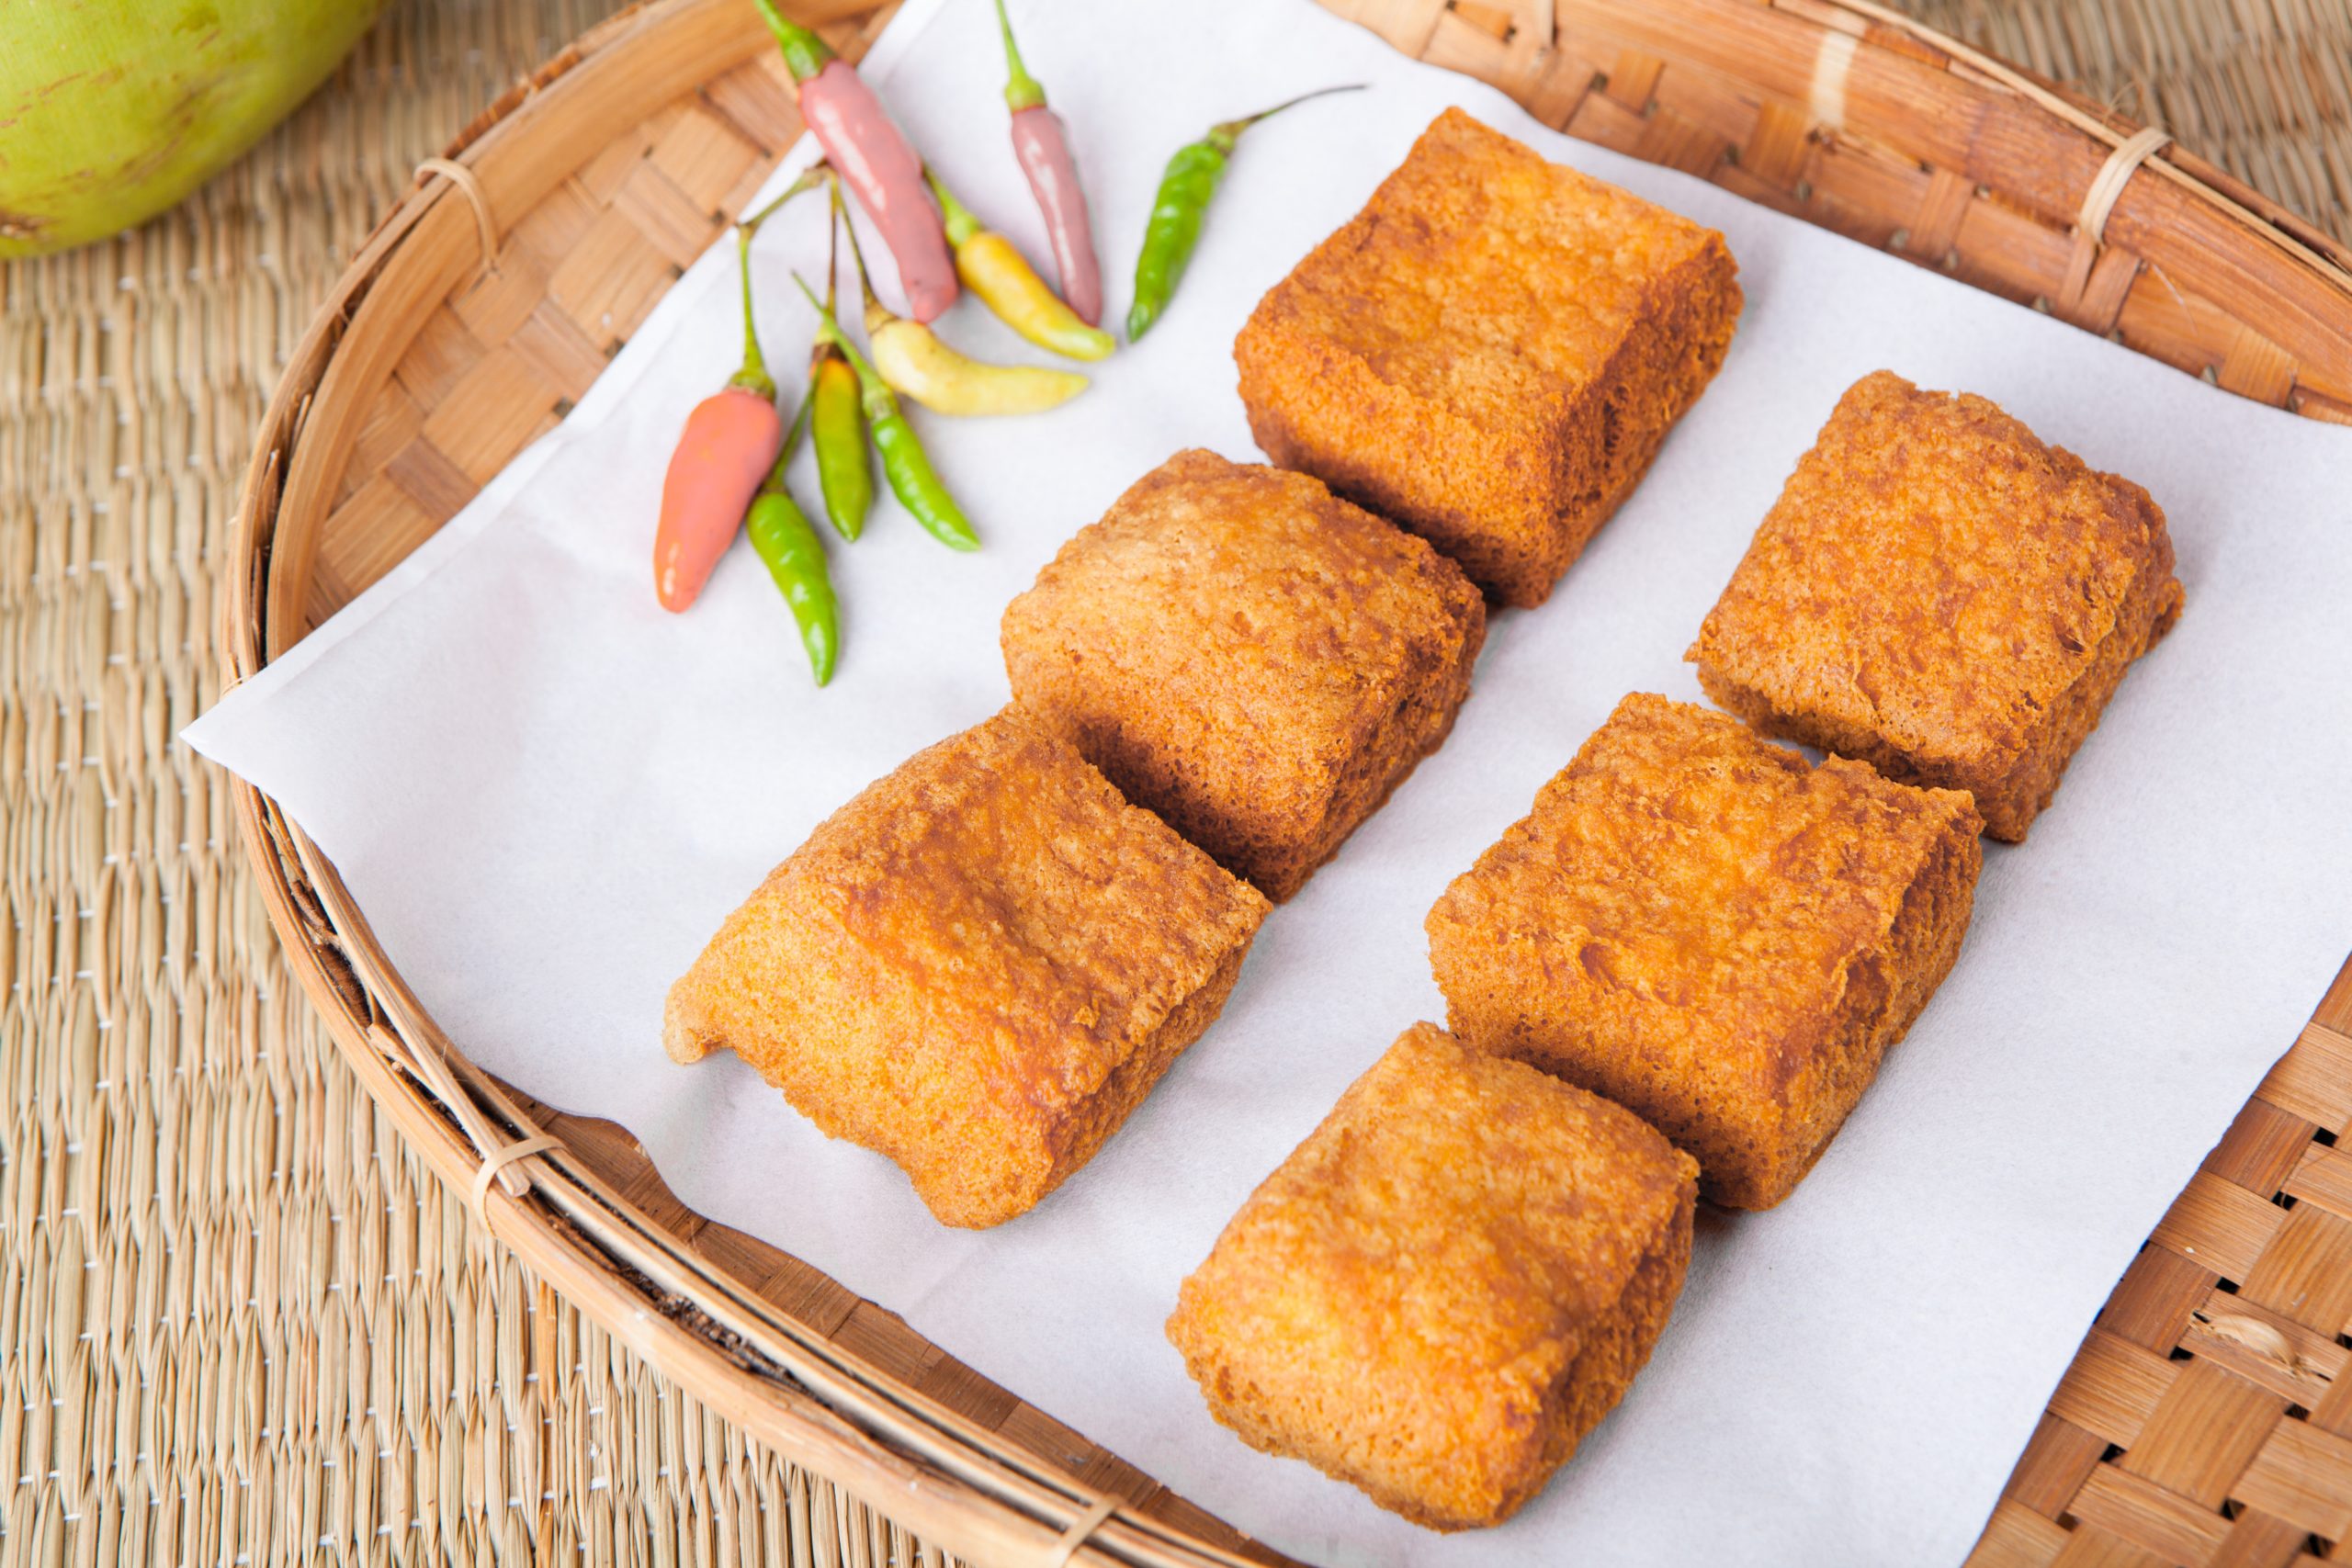 Breaded tofu. Tofu is a source of healthy fats. Image from Pexels.